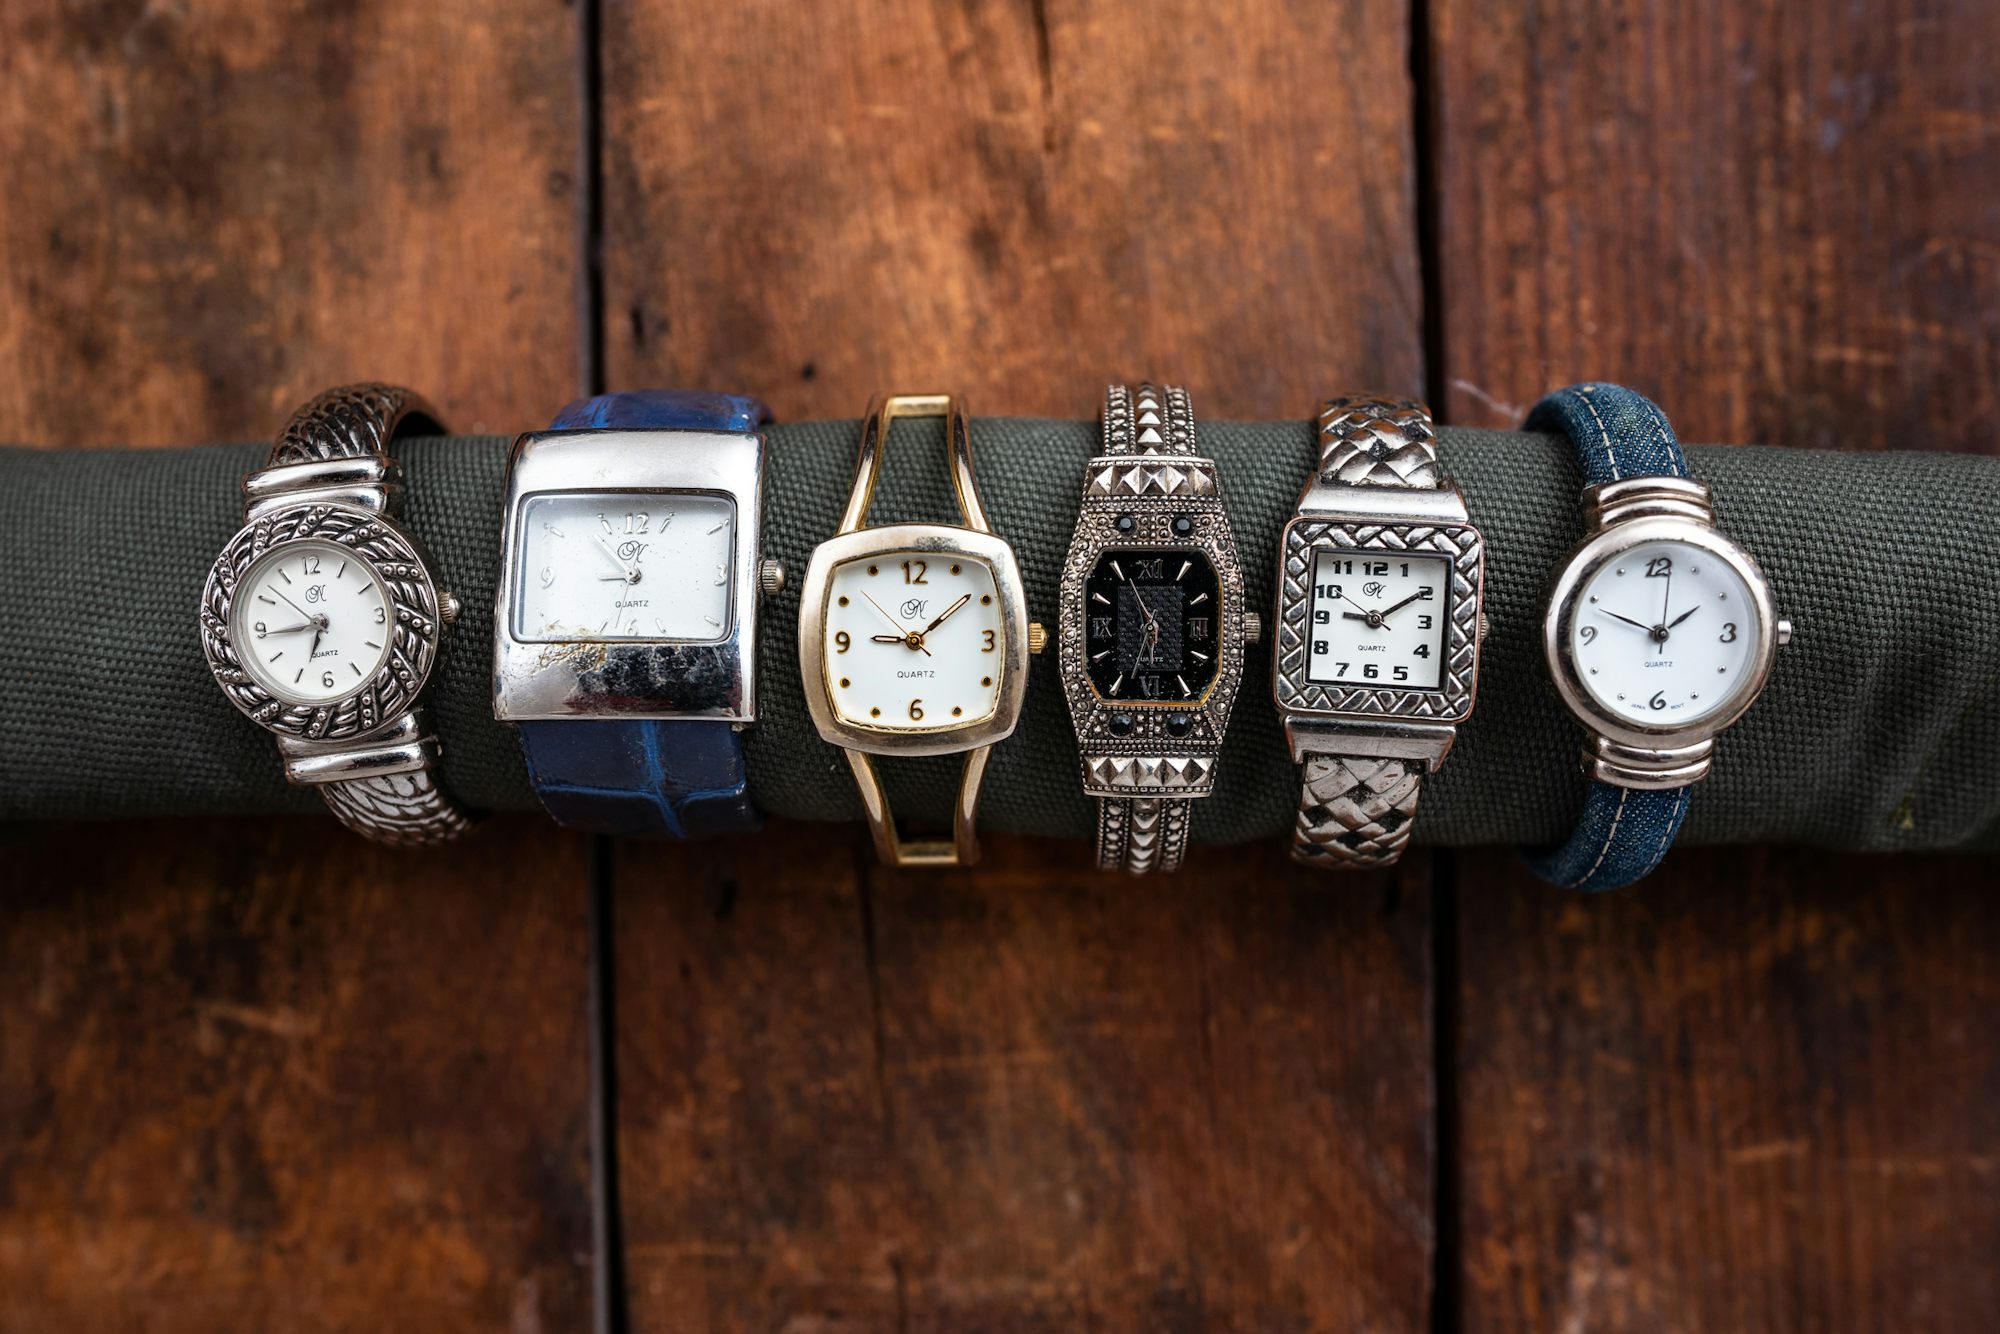 Several more cuff watches all aligned on a table. 